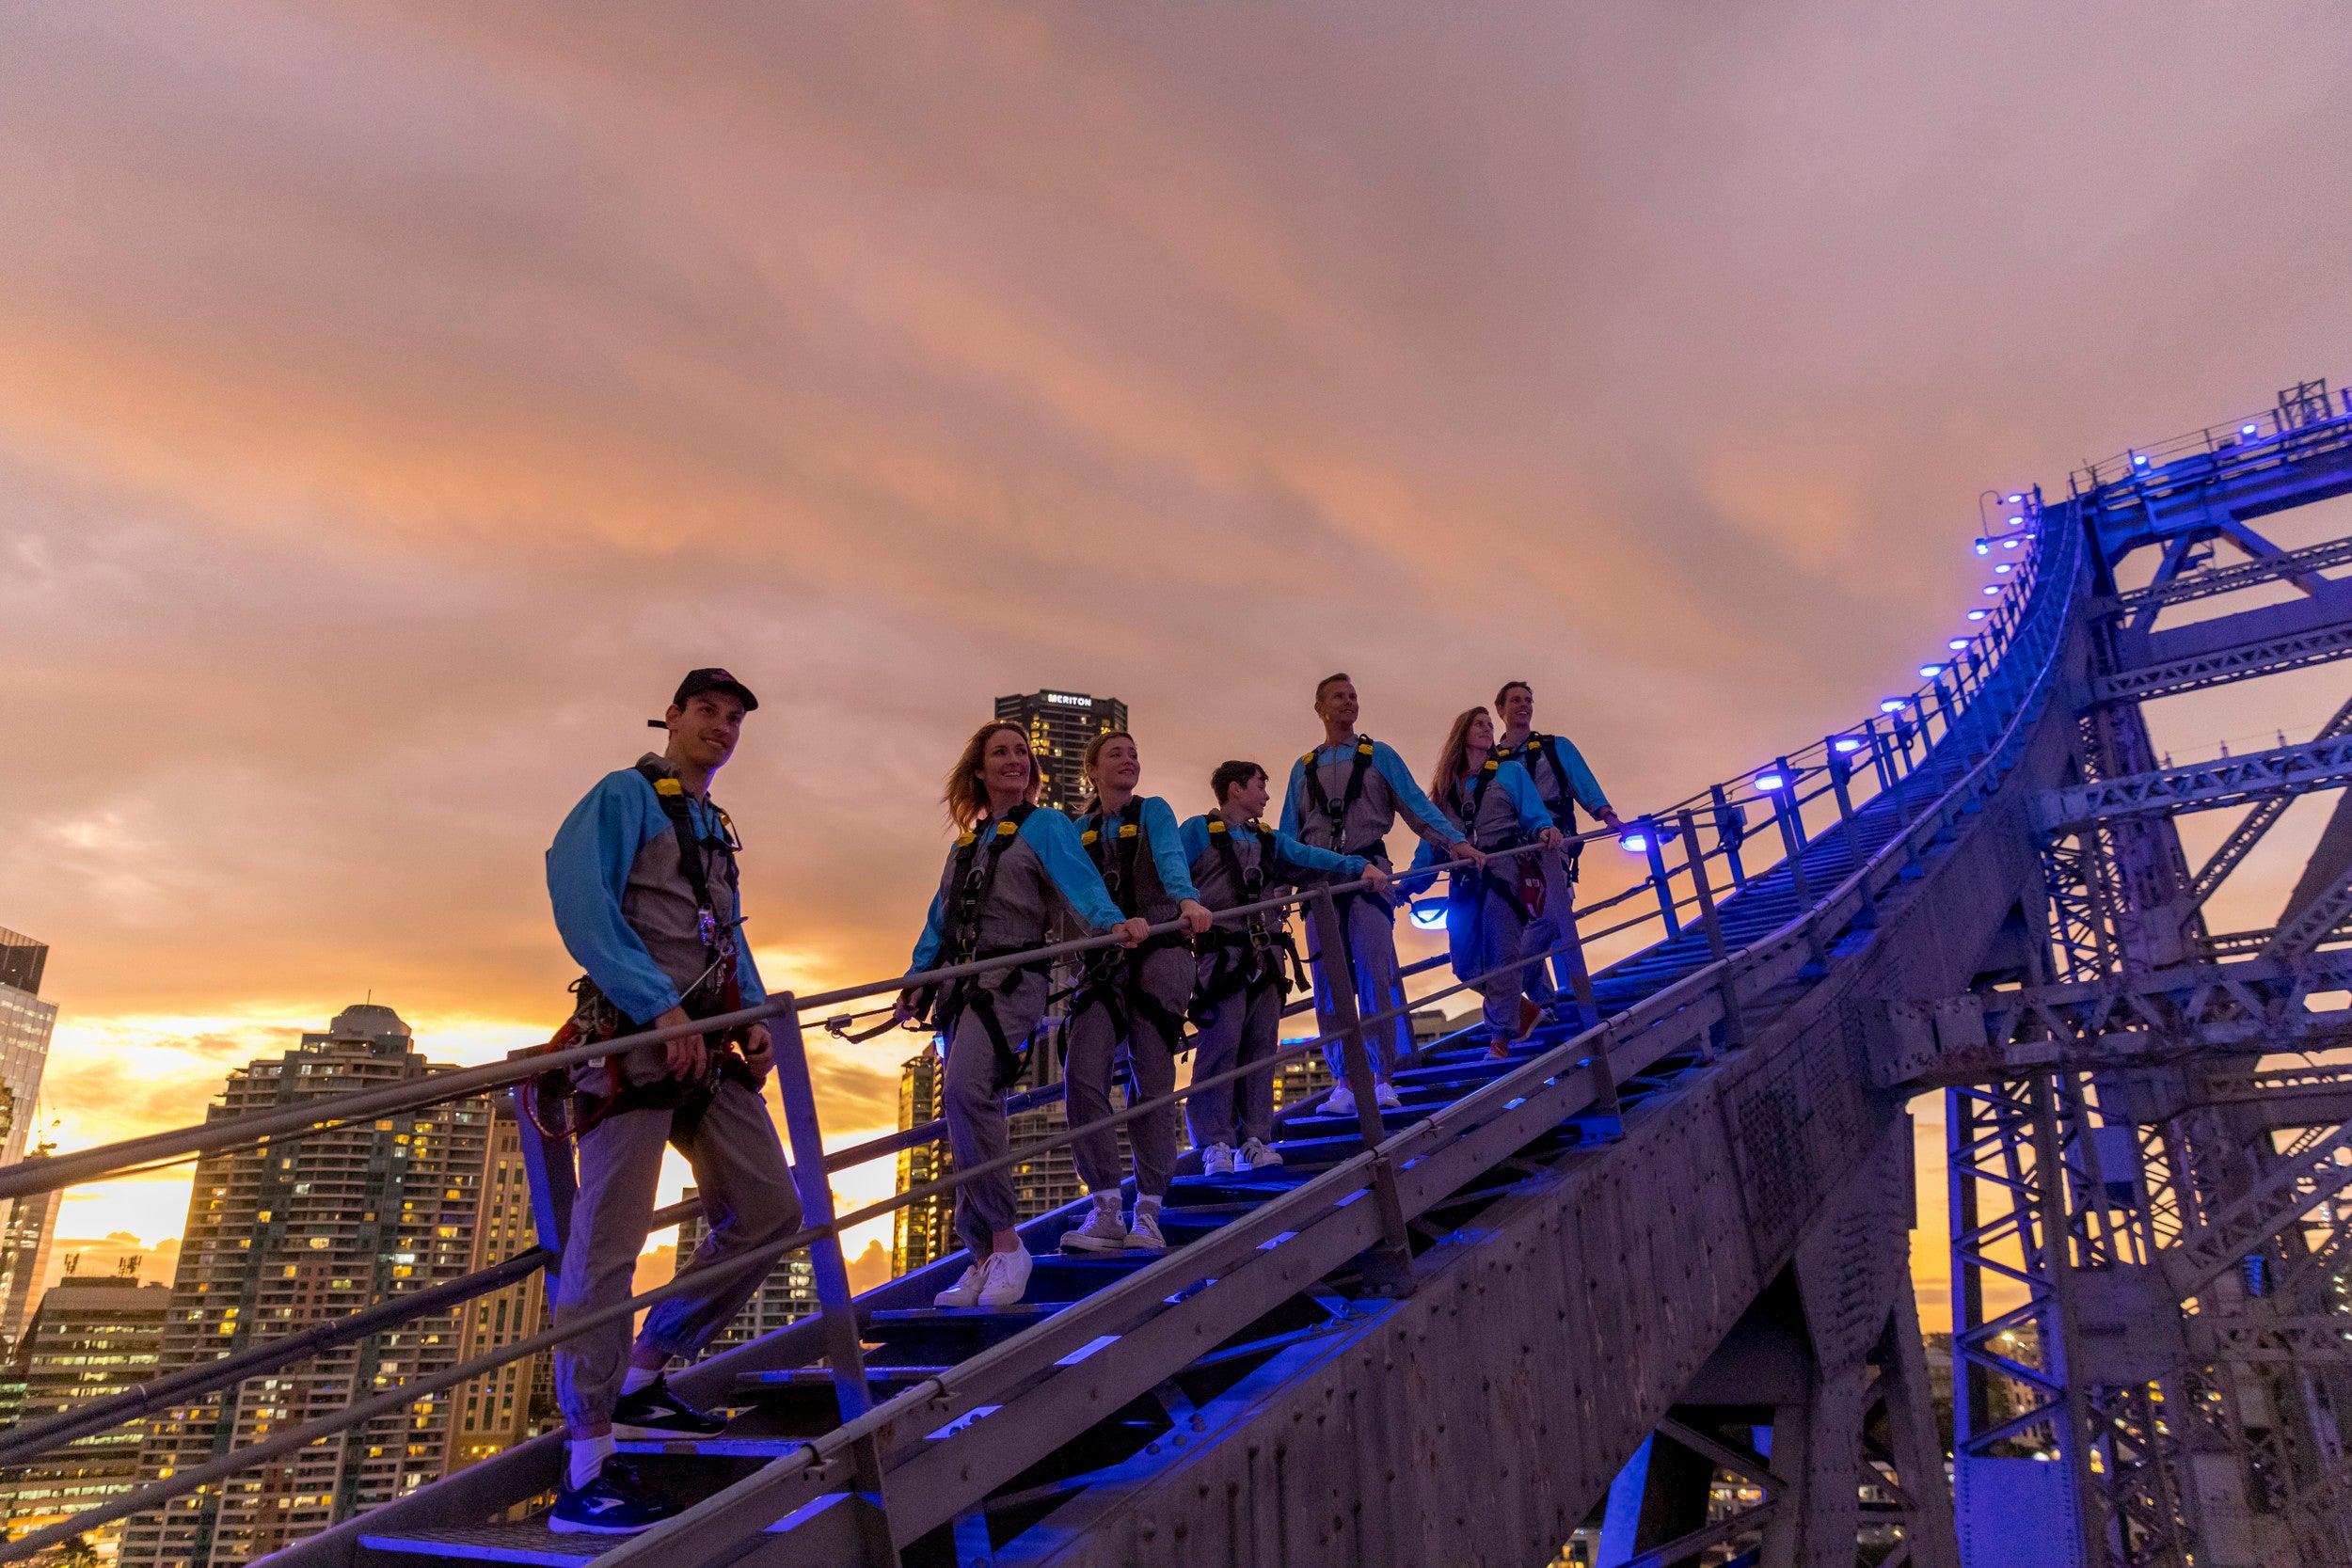 Don a harness and summit the architectural wonder that is Brisbane’s Story Bridge for unrivalled views of the city